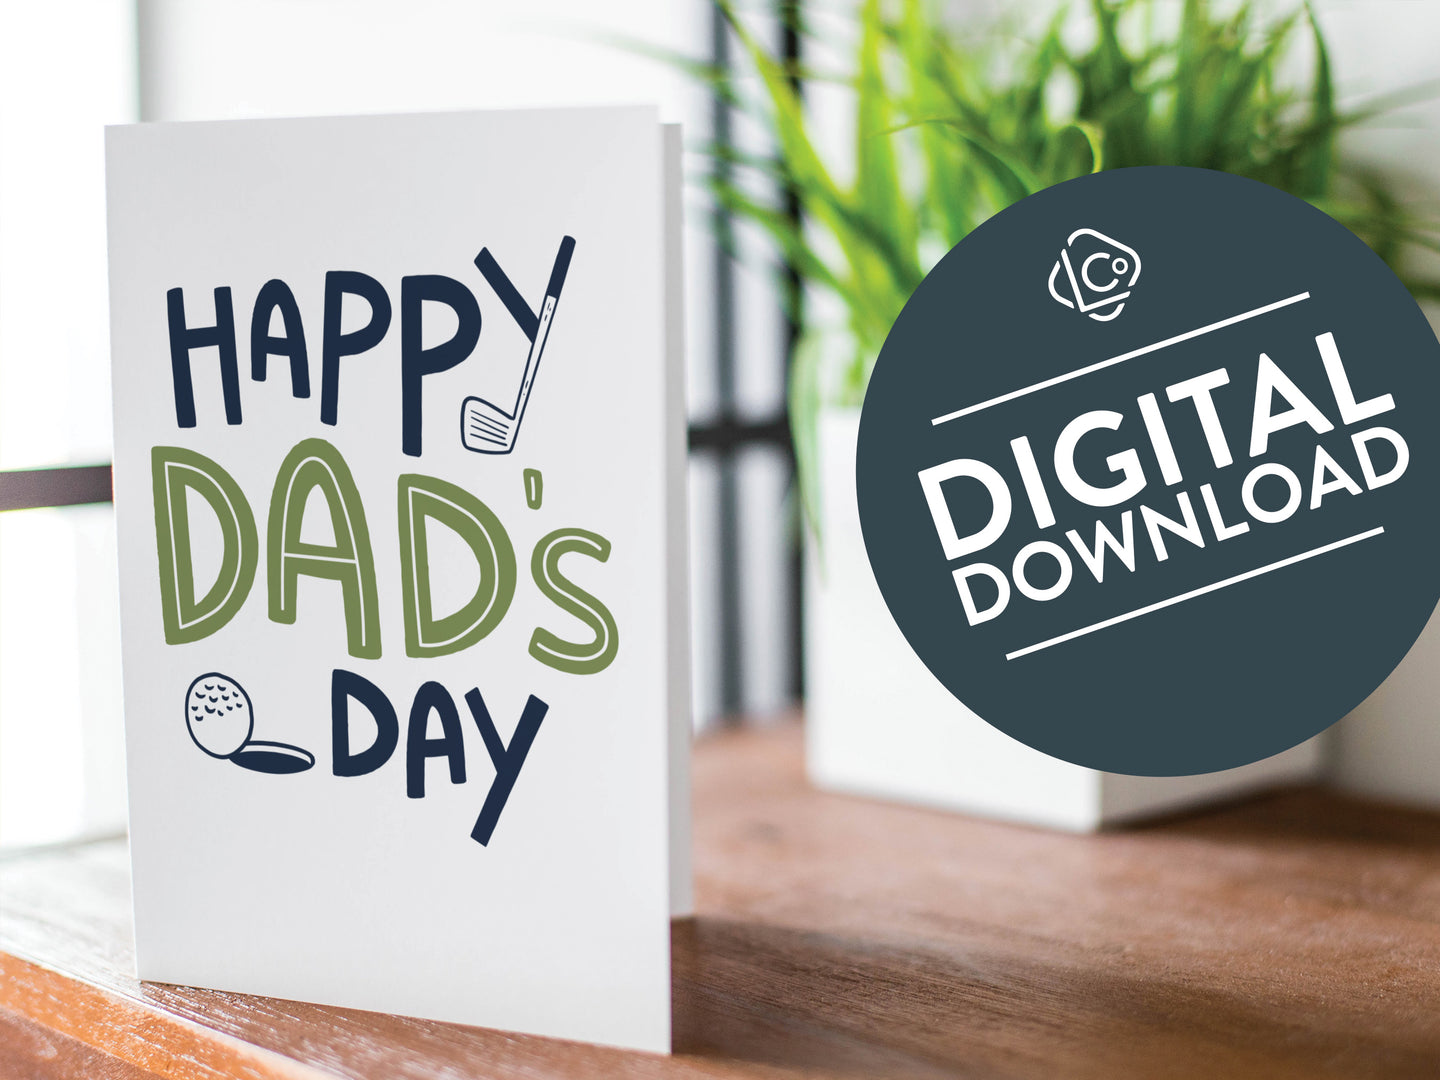 A greeting card is featured on a wood coffee table with a green plant in a white planter in the background. The card features the words “Happy Dad’s Day” with an illustrated golf club and golf ball. The words 